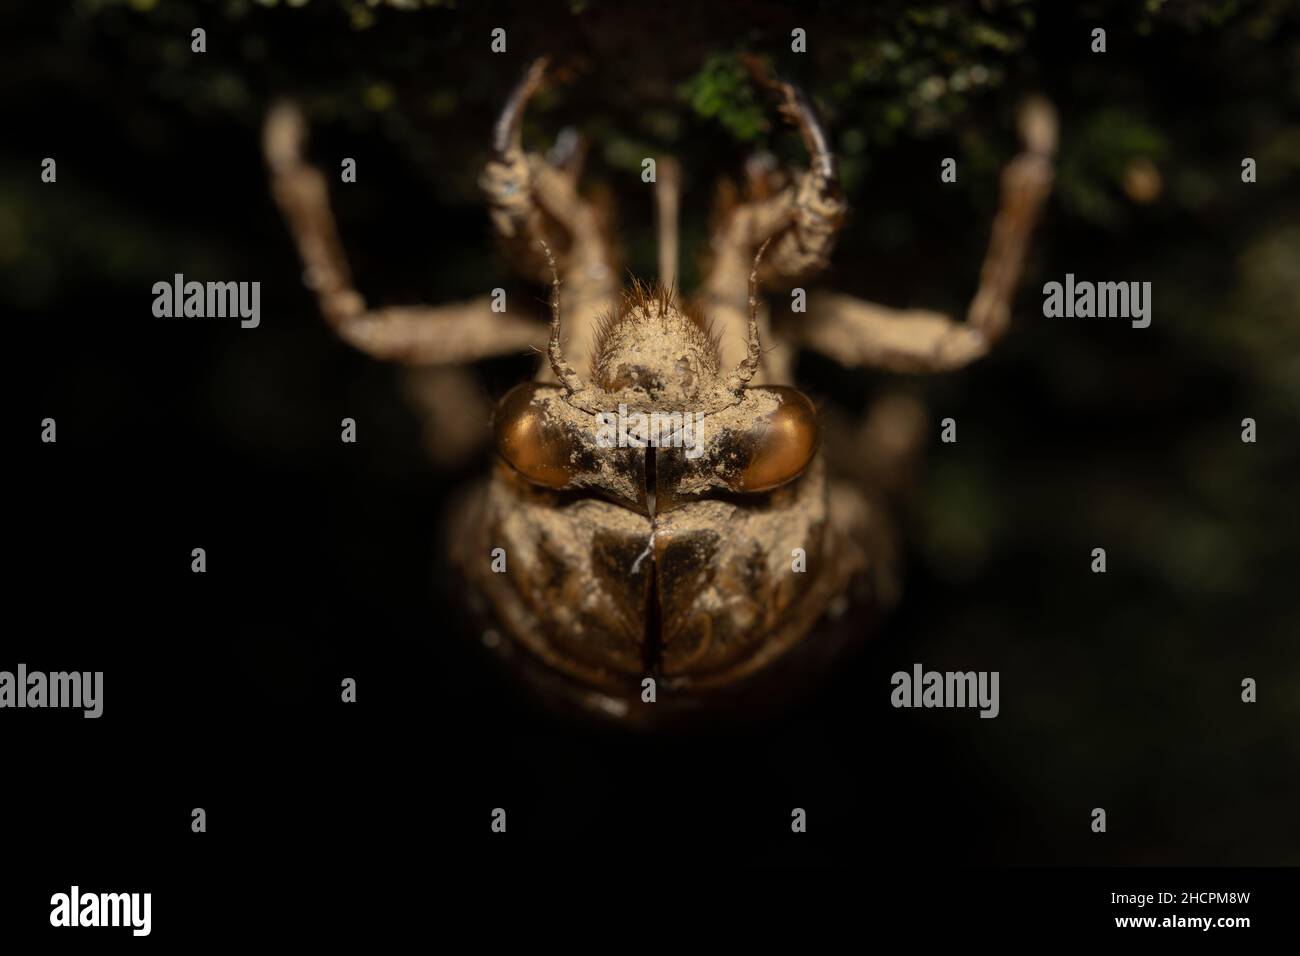 An empty cicada shell hanging upside down on a tree against a black background. Stock Photo